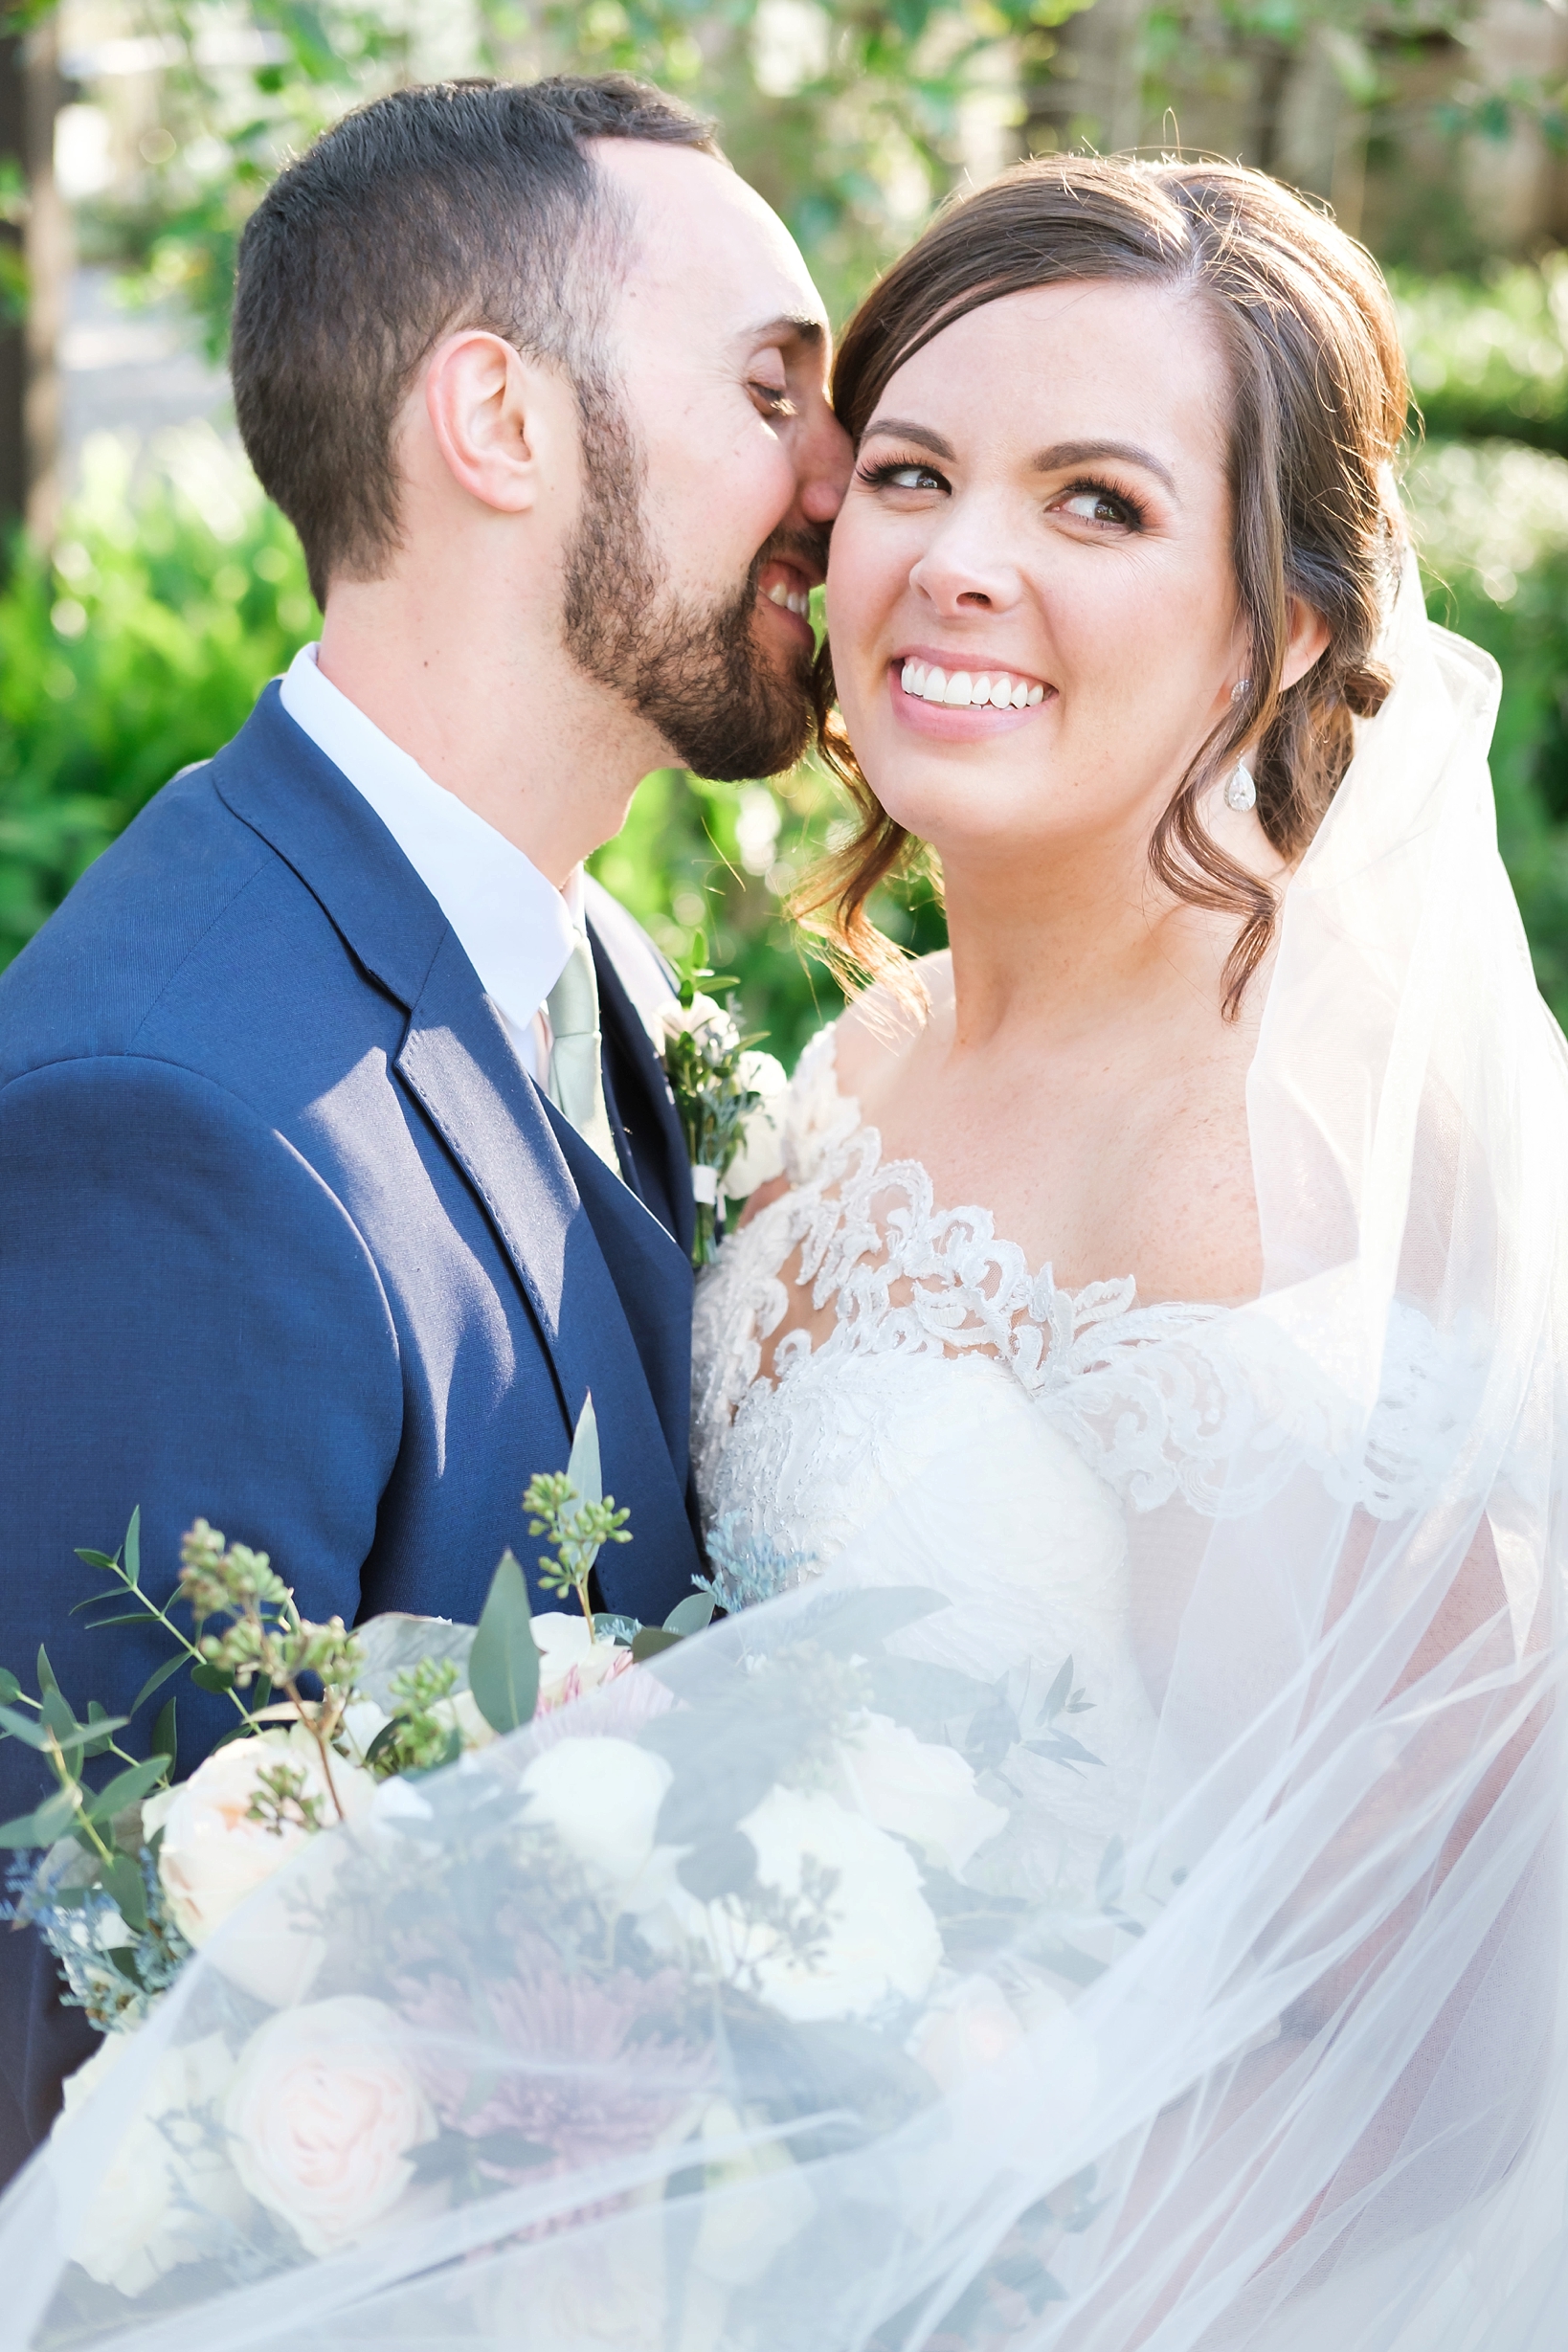 Groom whispers into his Bride's ear as she smiles